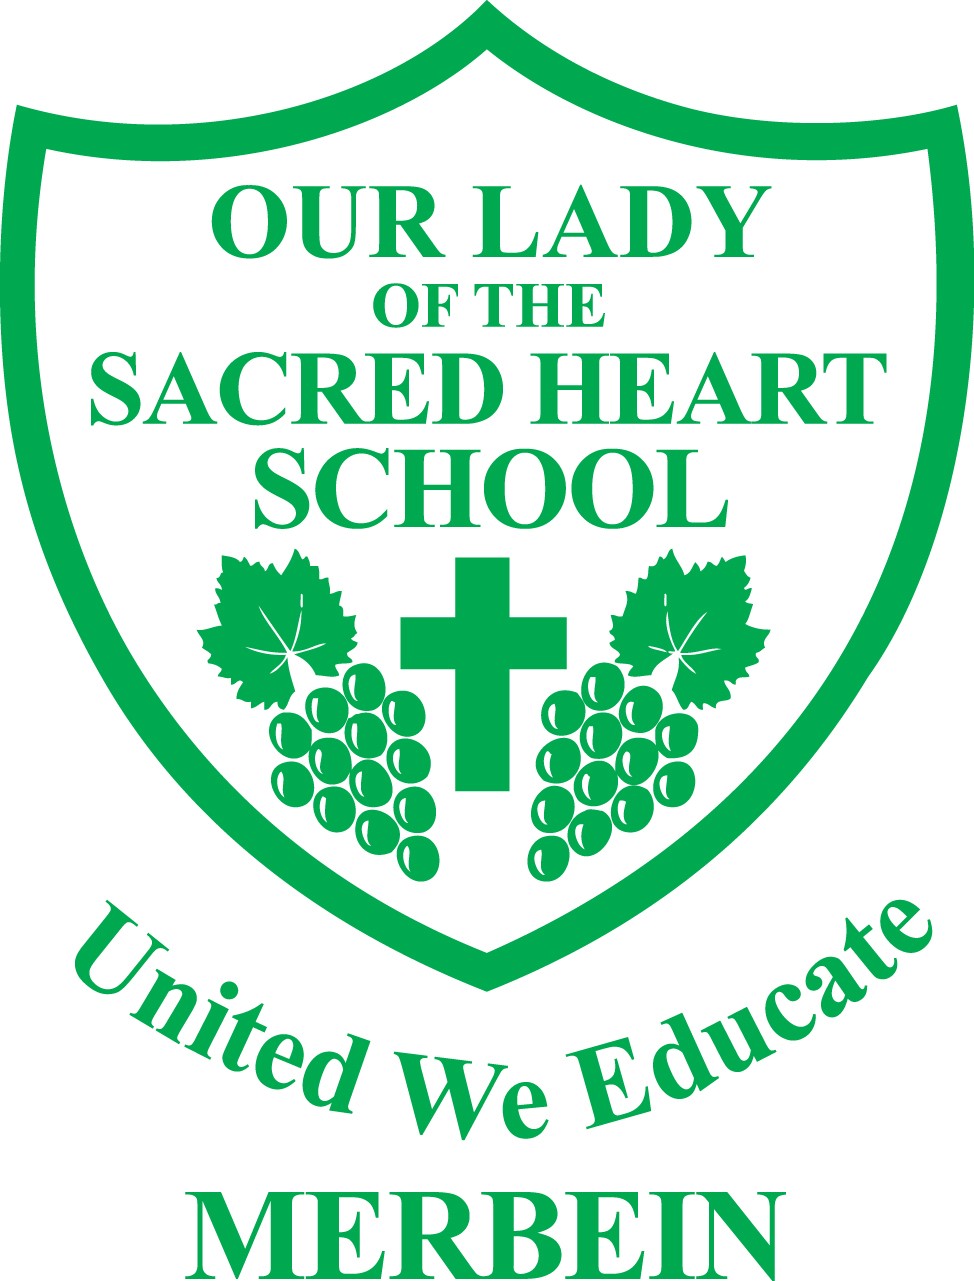 Our Lady of the Sacred Heart School 